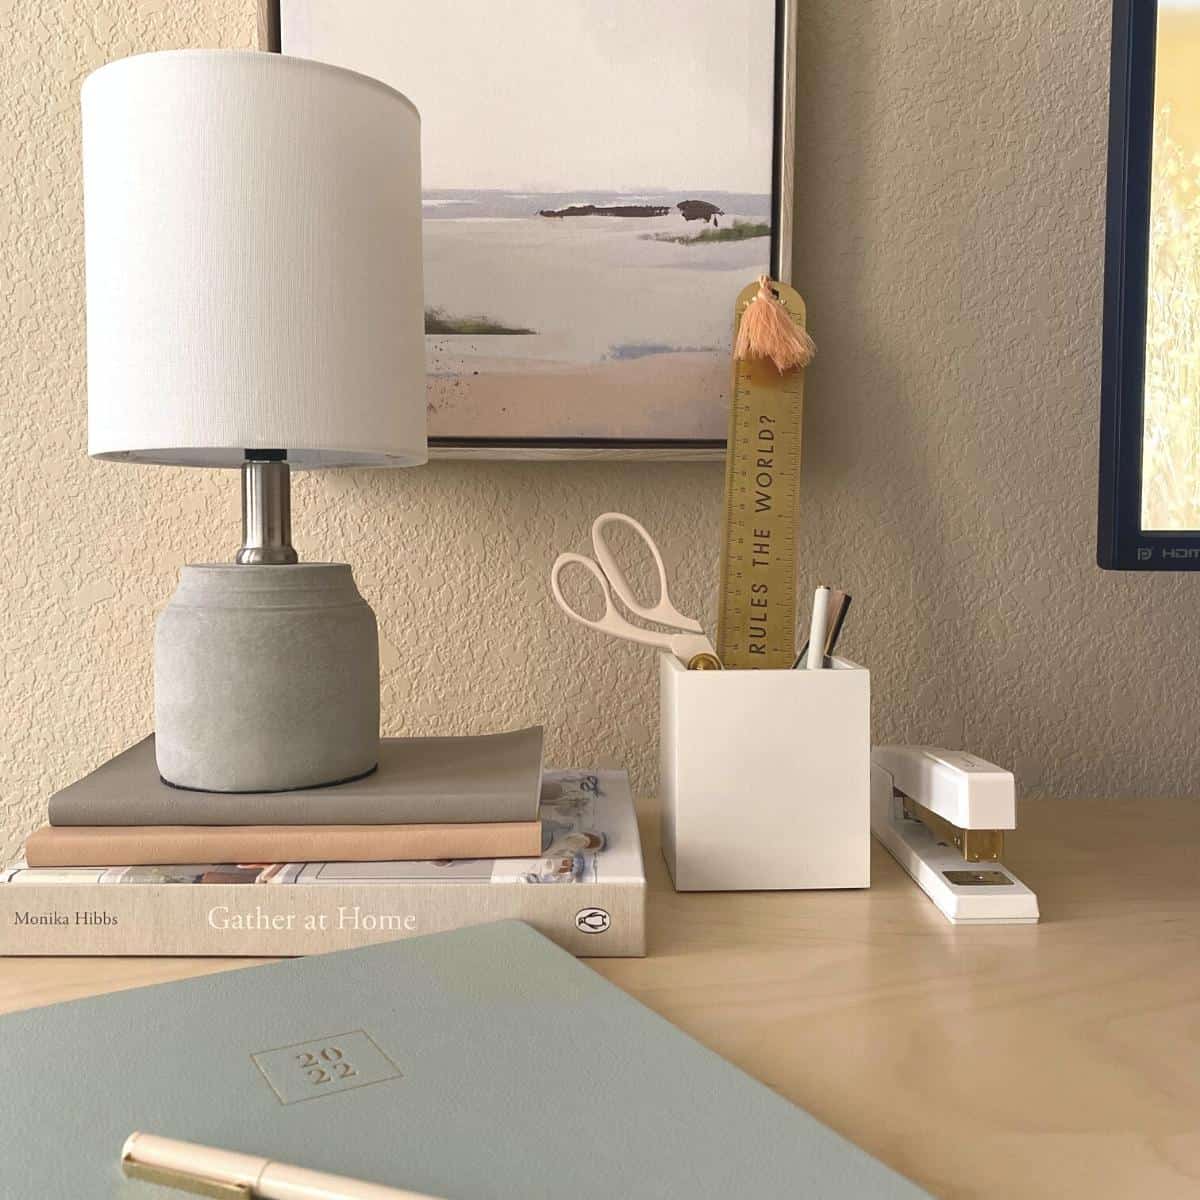 Aesthetic desk accessories with a small art print on the wall.